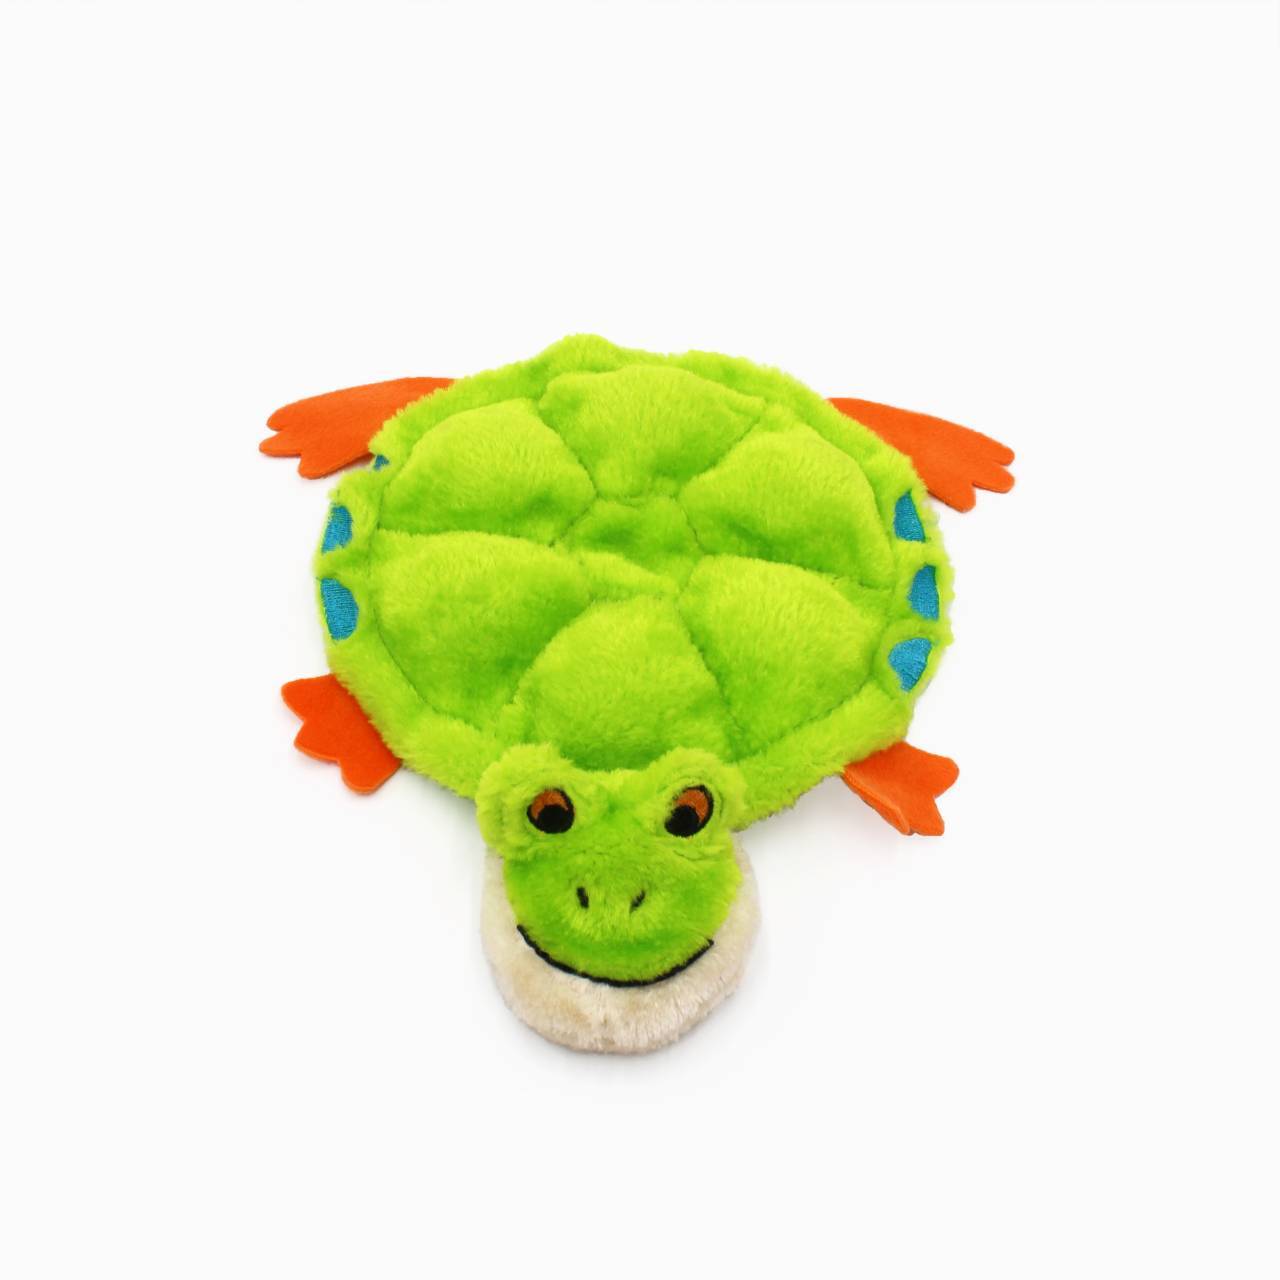 Zippy Paws Squeakie Crawler Plush Squeaker Dog Toy - Toby the Tree Frog  image 0